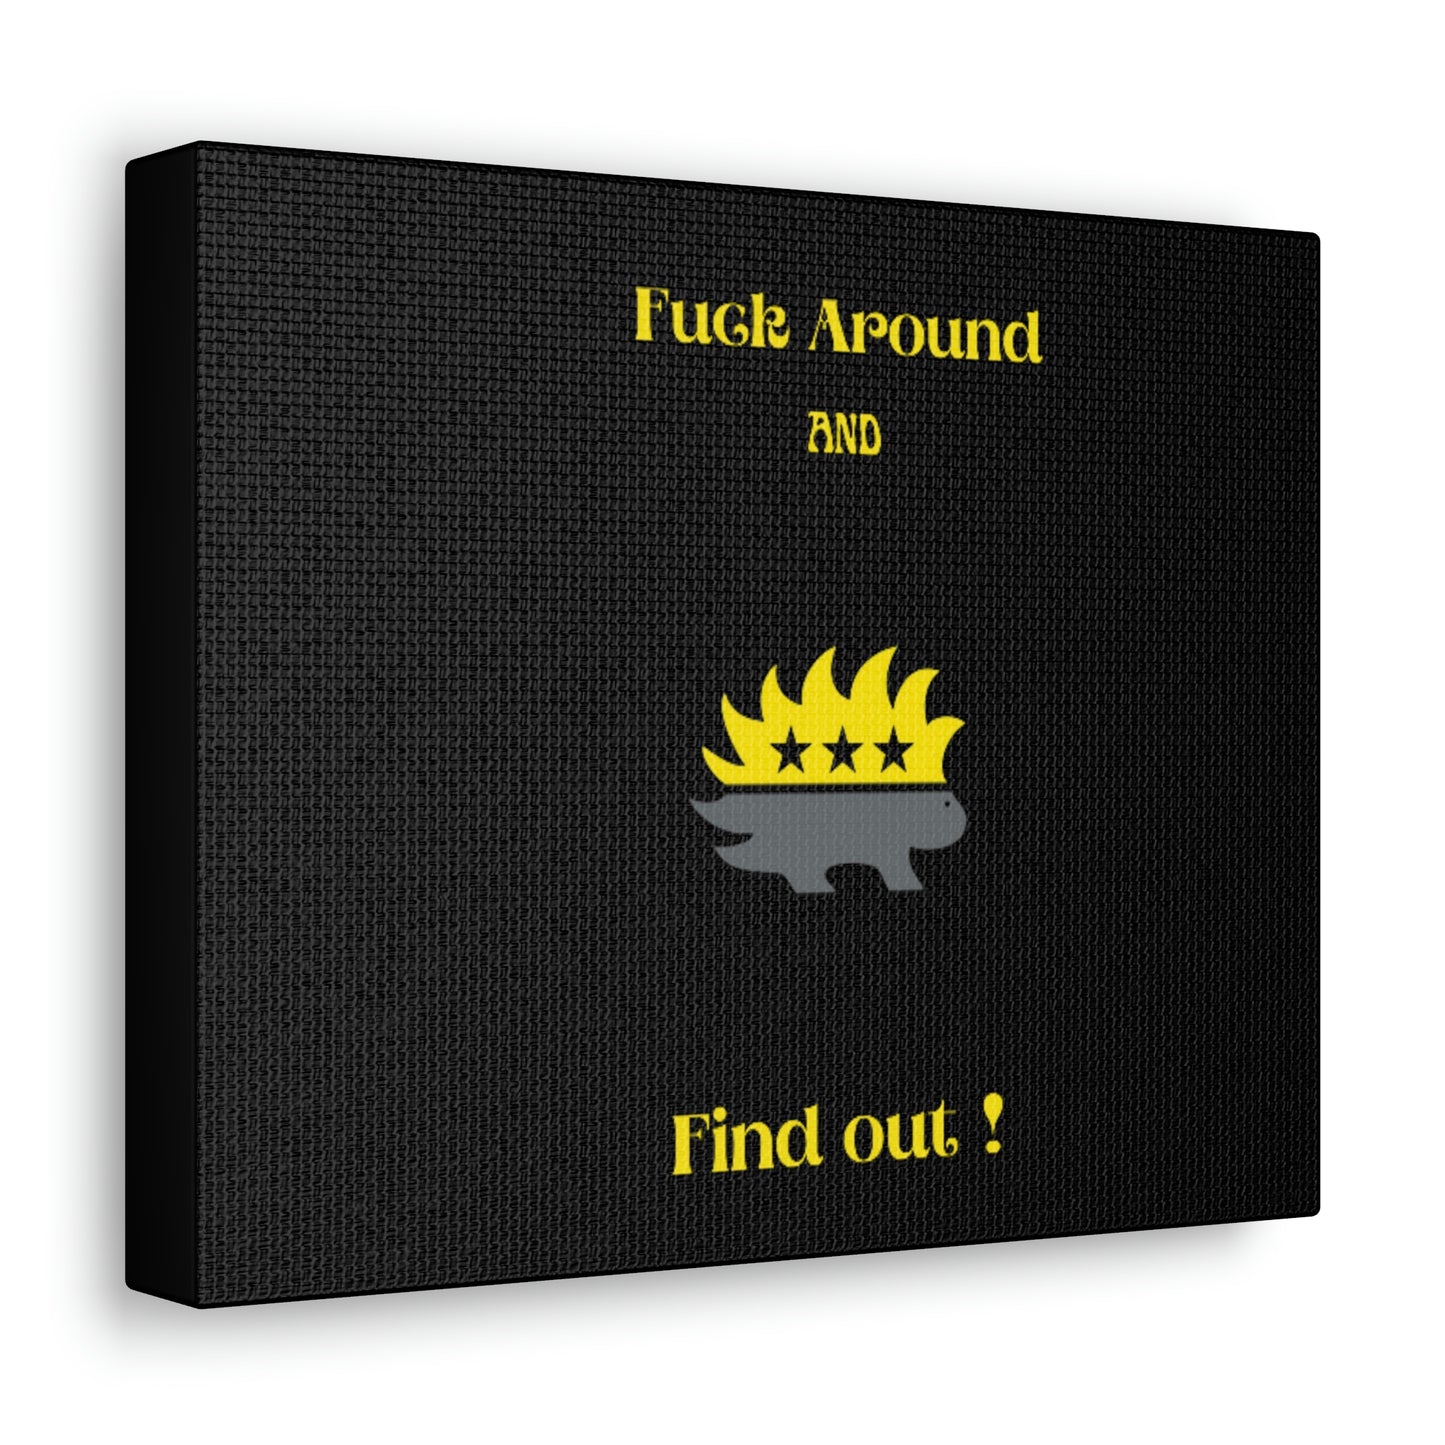 Fuck Around And Find Out! Canvas